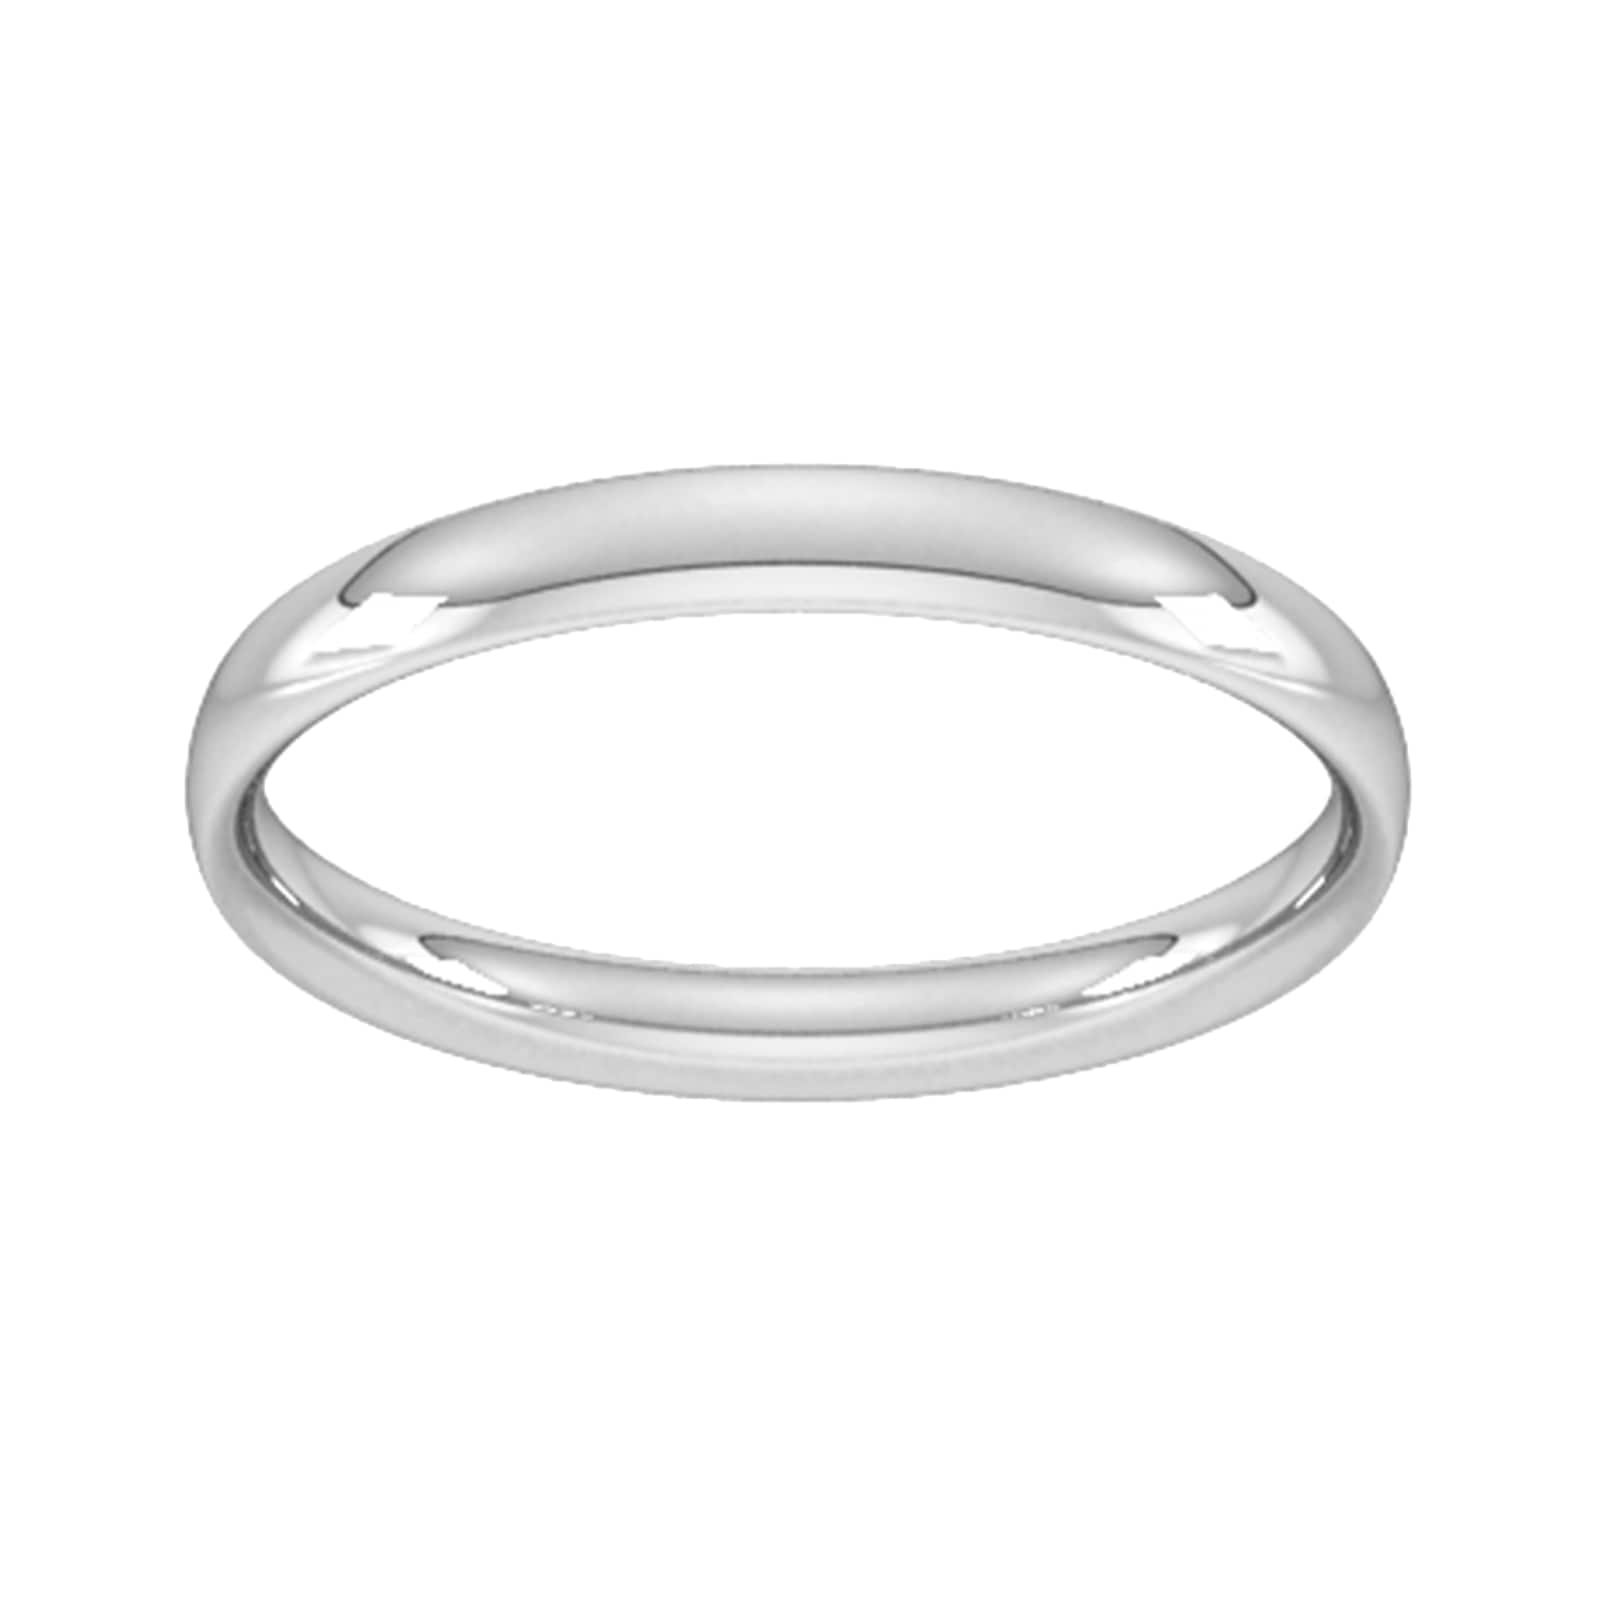 2.5mm traditional court standard wedding ring in 9 carat white gold - ring size k